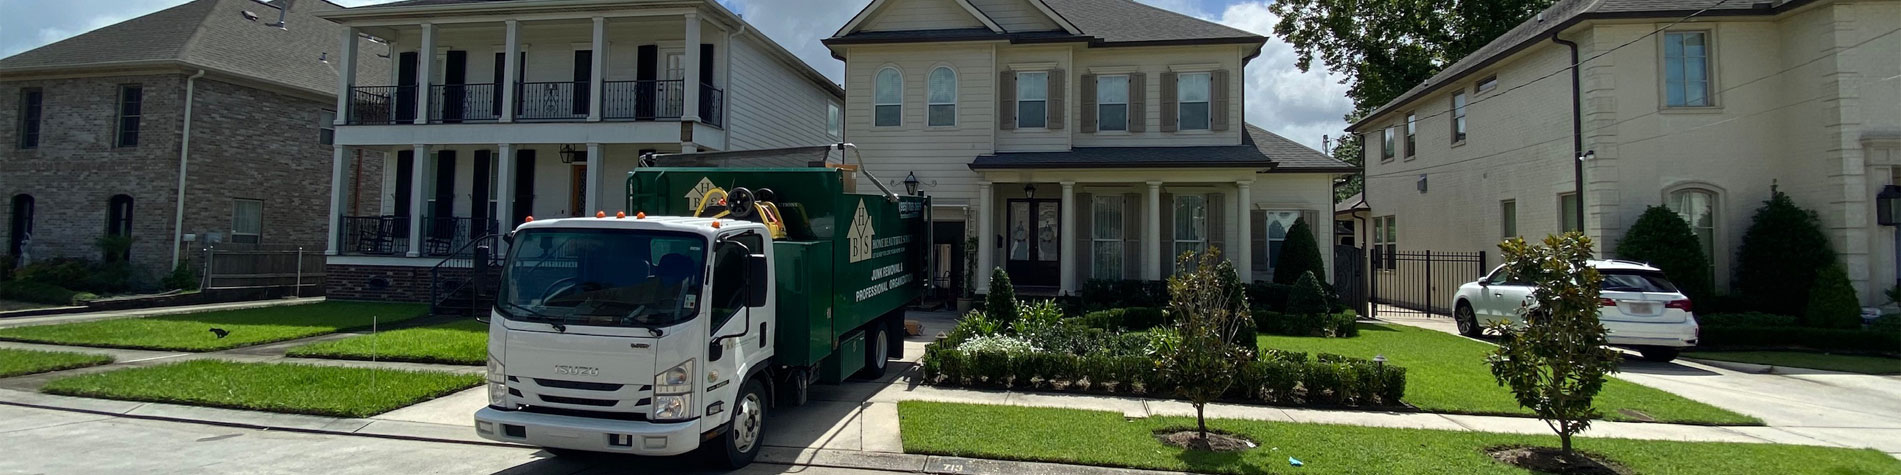 Junk Removal Truck in a Slidell Neighborhood Completing Junk Removal Work